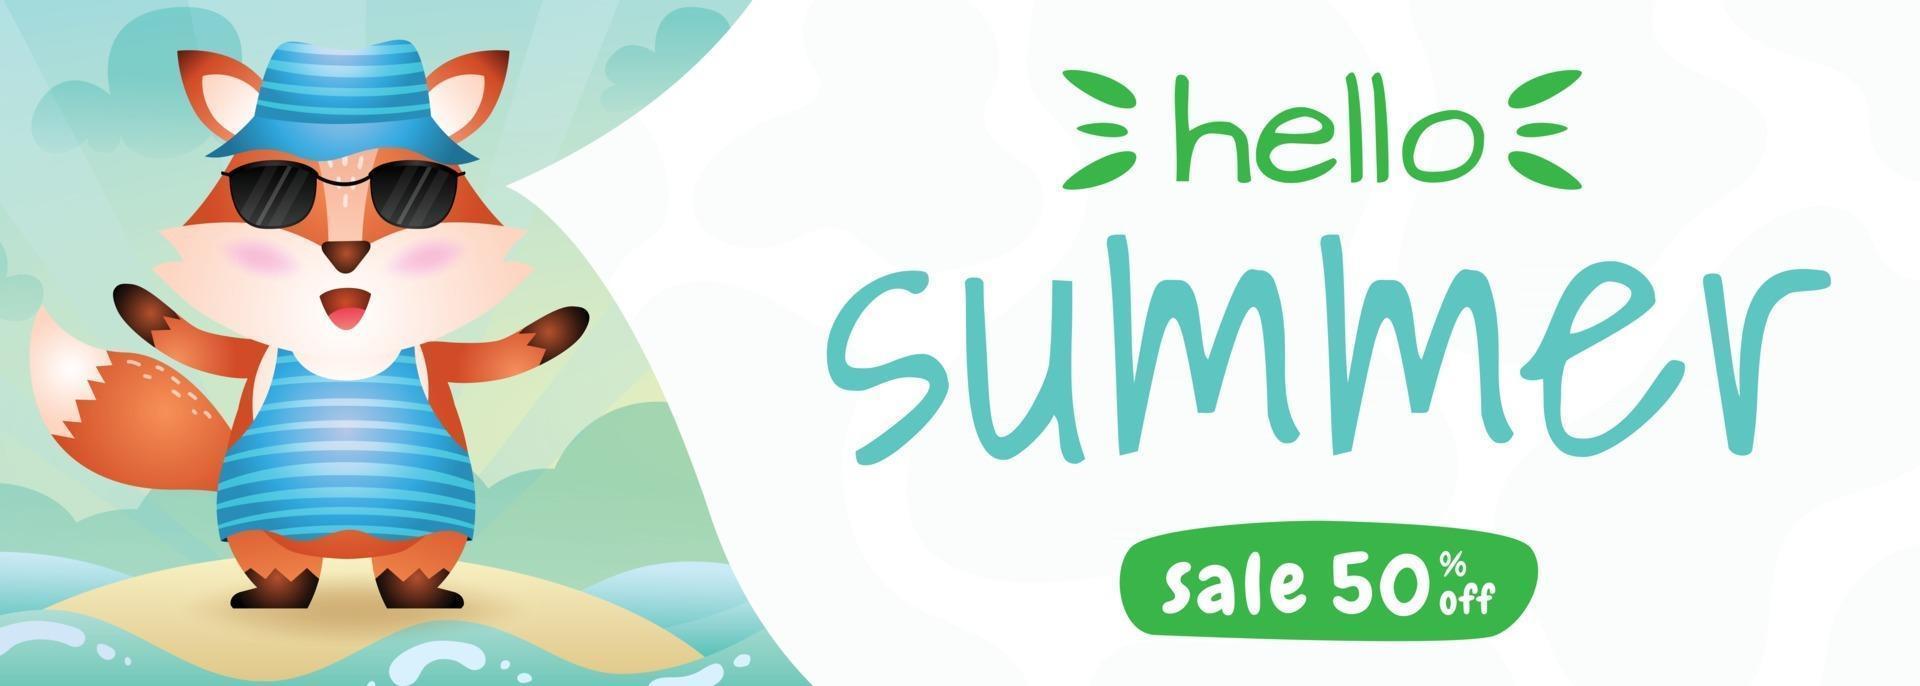 summer sale banner with a cute fox using summer costume vector